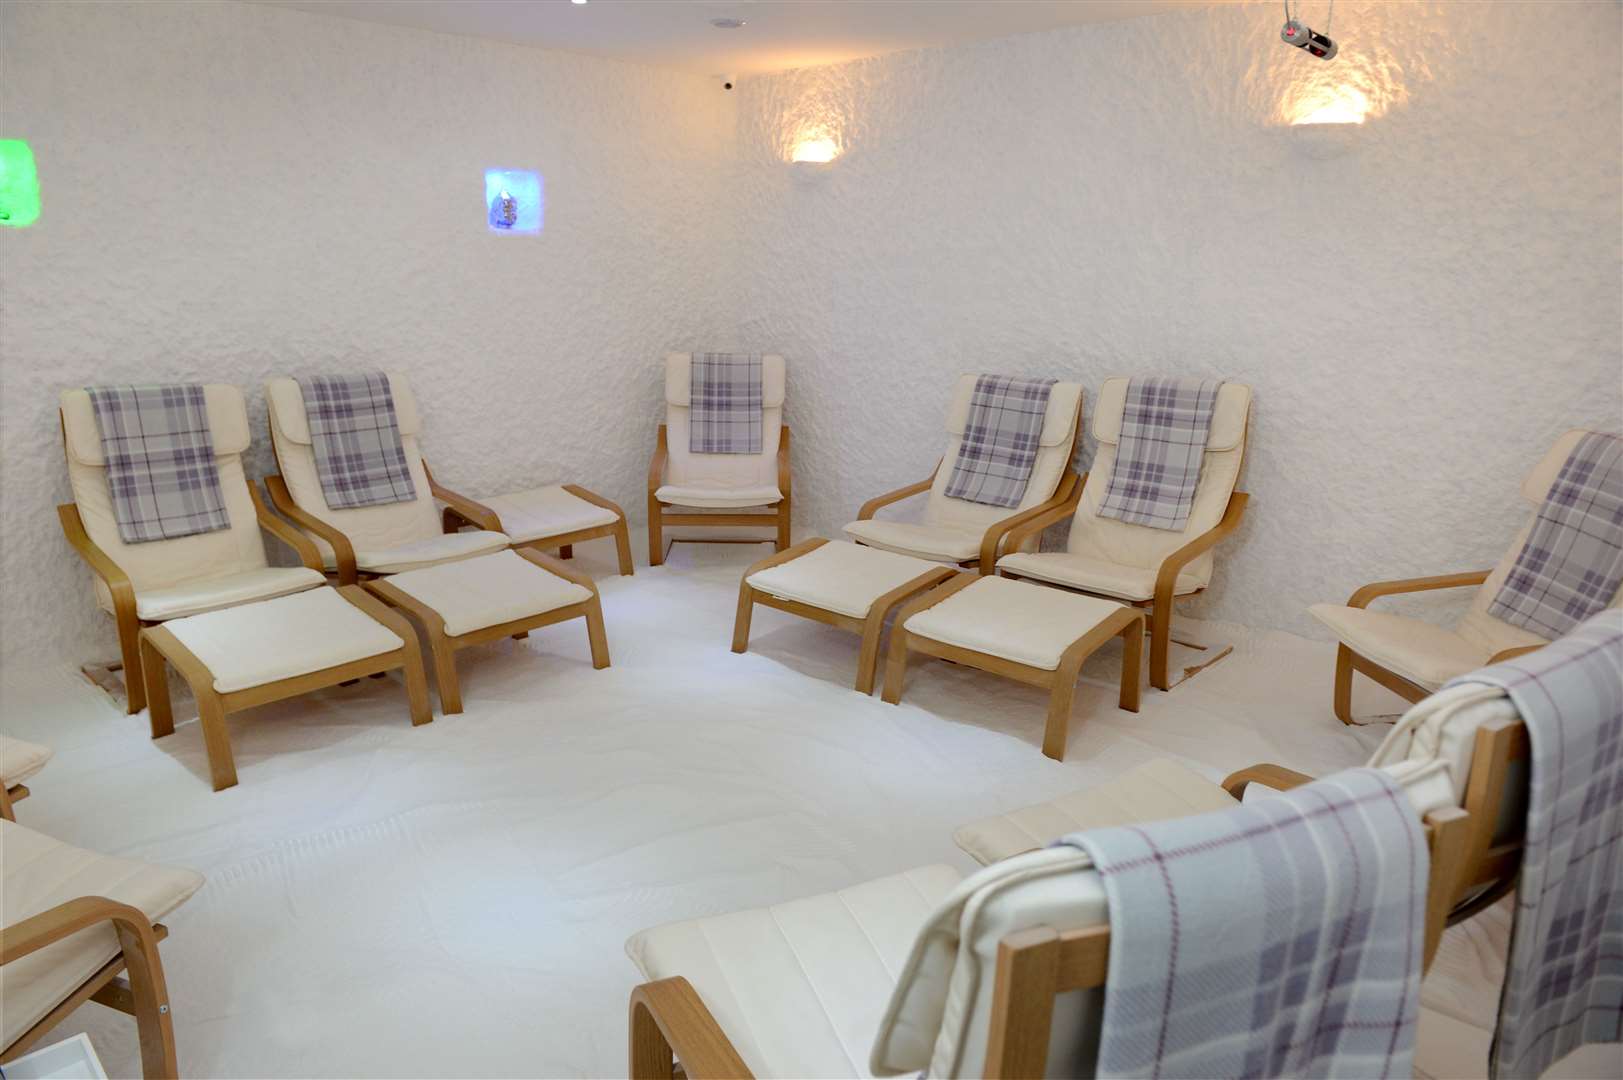 The Inverness Salt Therapy Centre at Marr House in Beechwood Business Park, Inverness, has closed its doors.